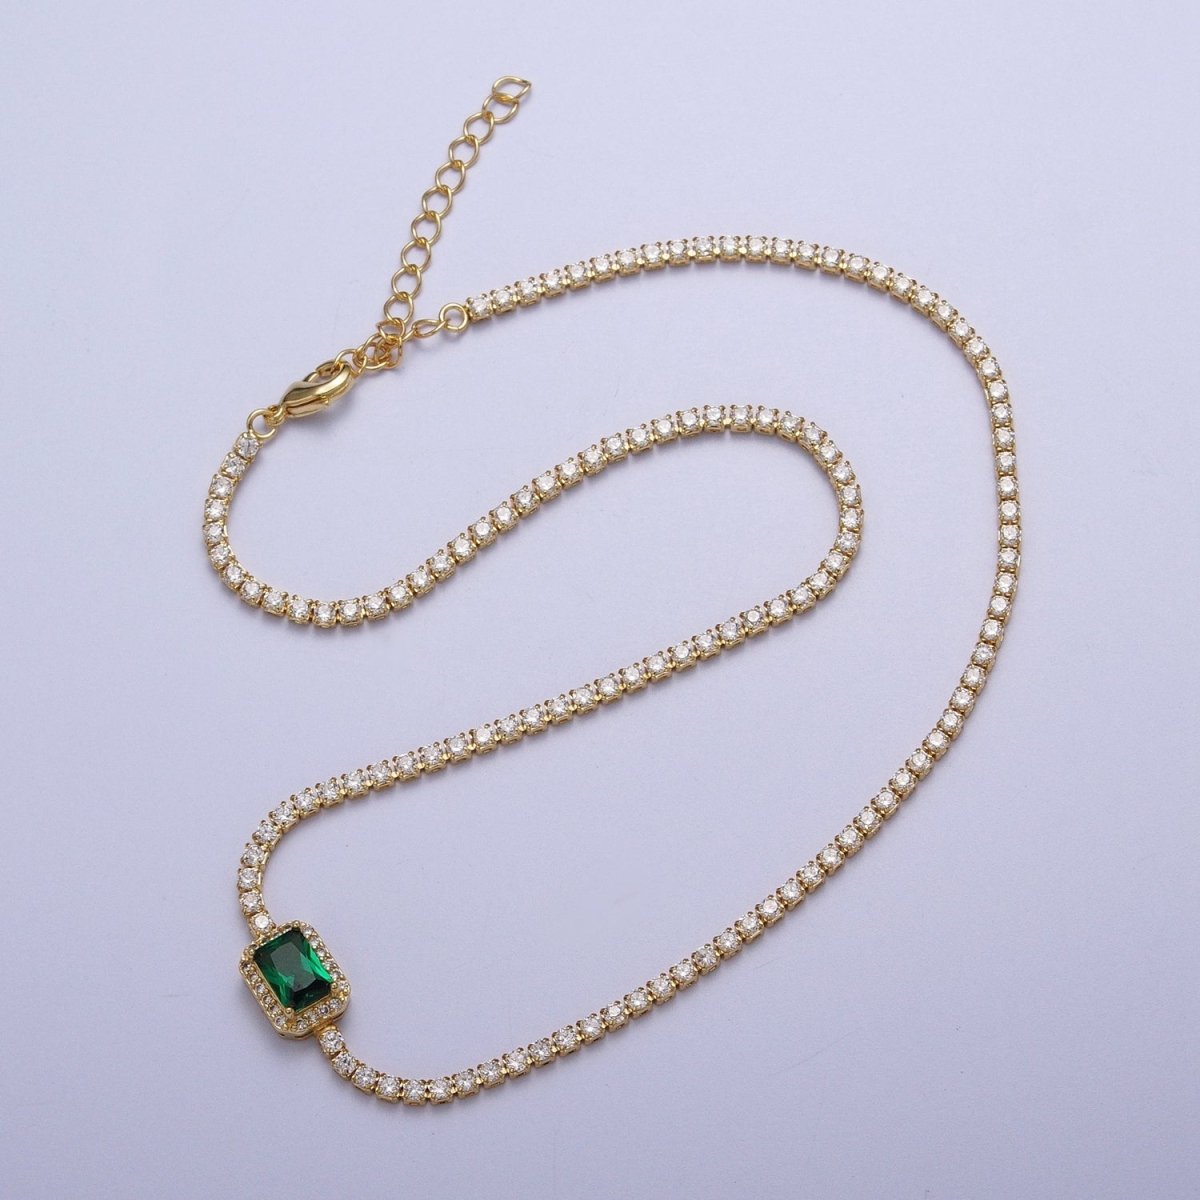 14k Gold Filled Tennis Necklace Chain with Color Emerald Cut Cz Stone for Layering Necklace | WA-1156 to WA-1159 Clearance Pricing - DLUXCA